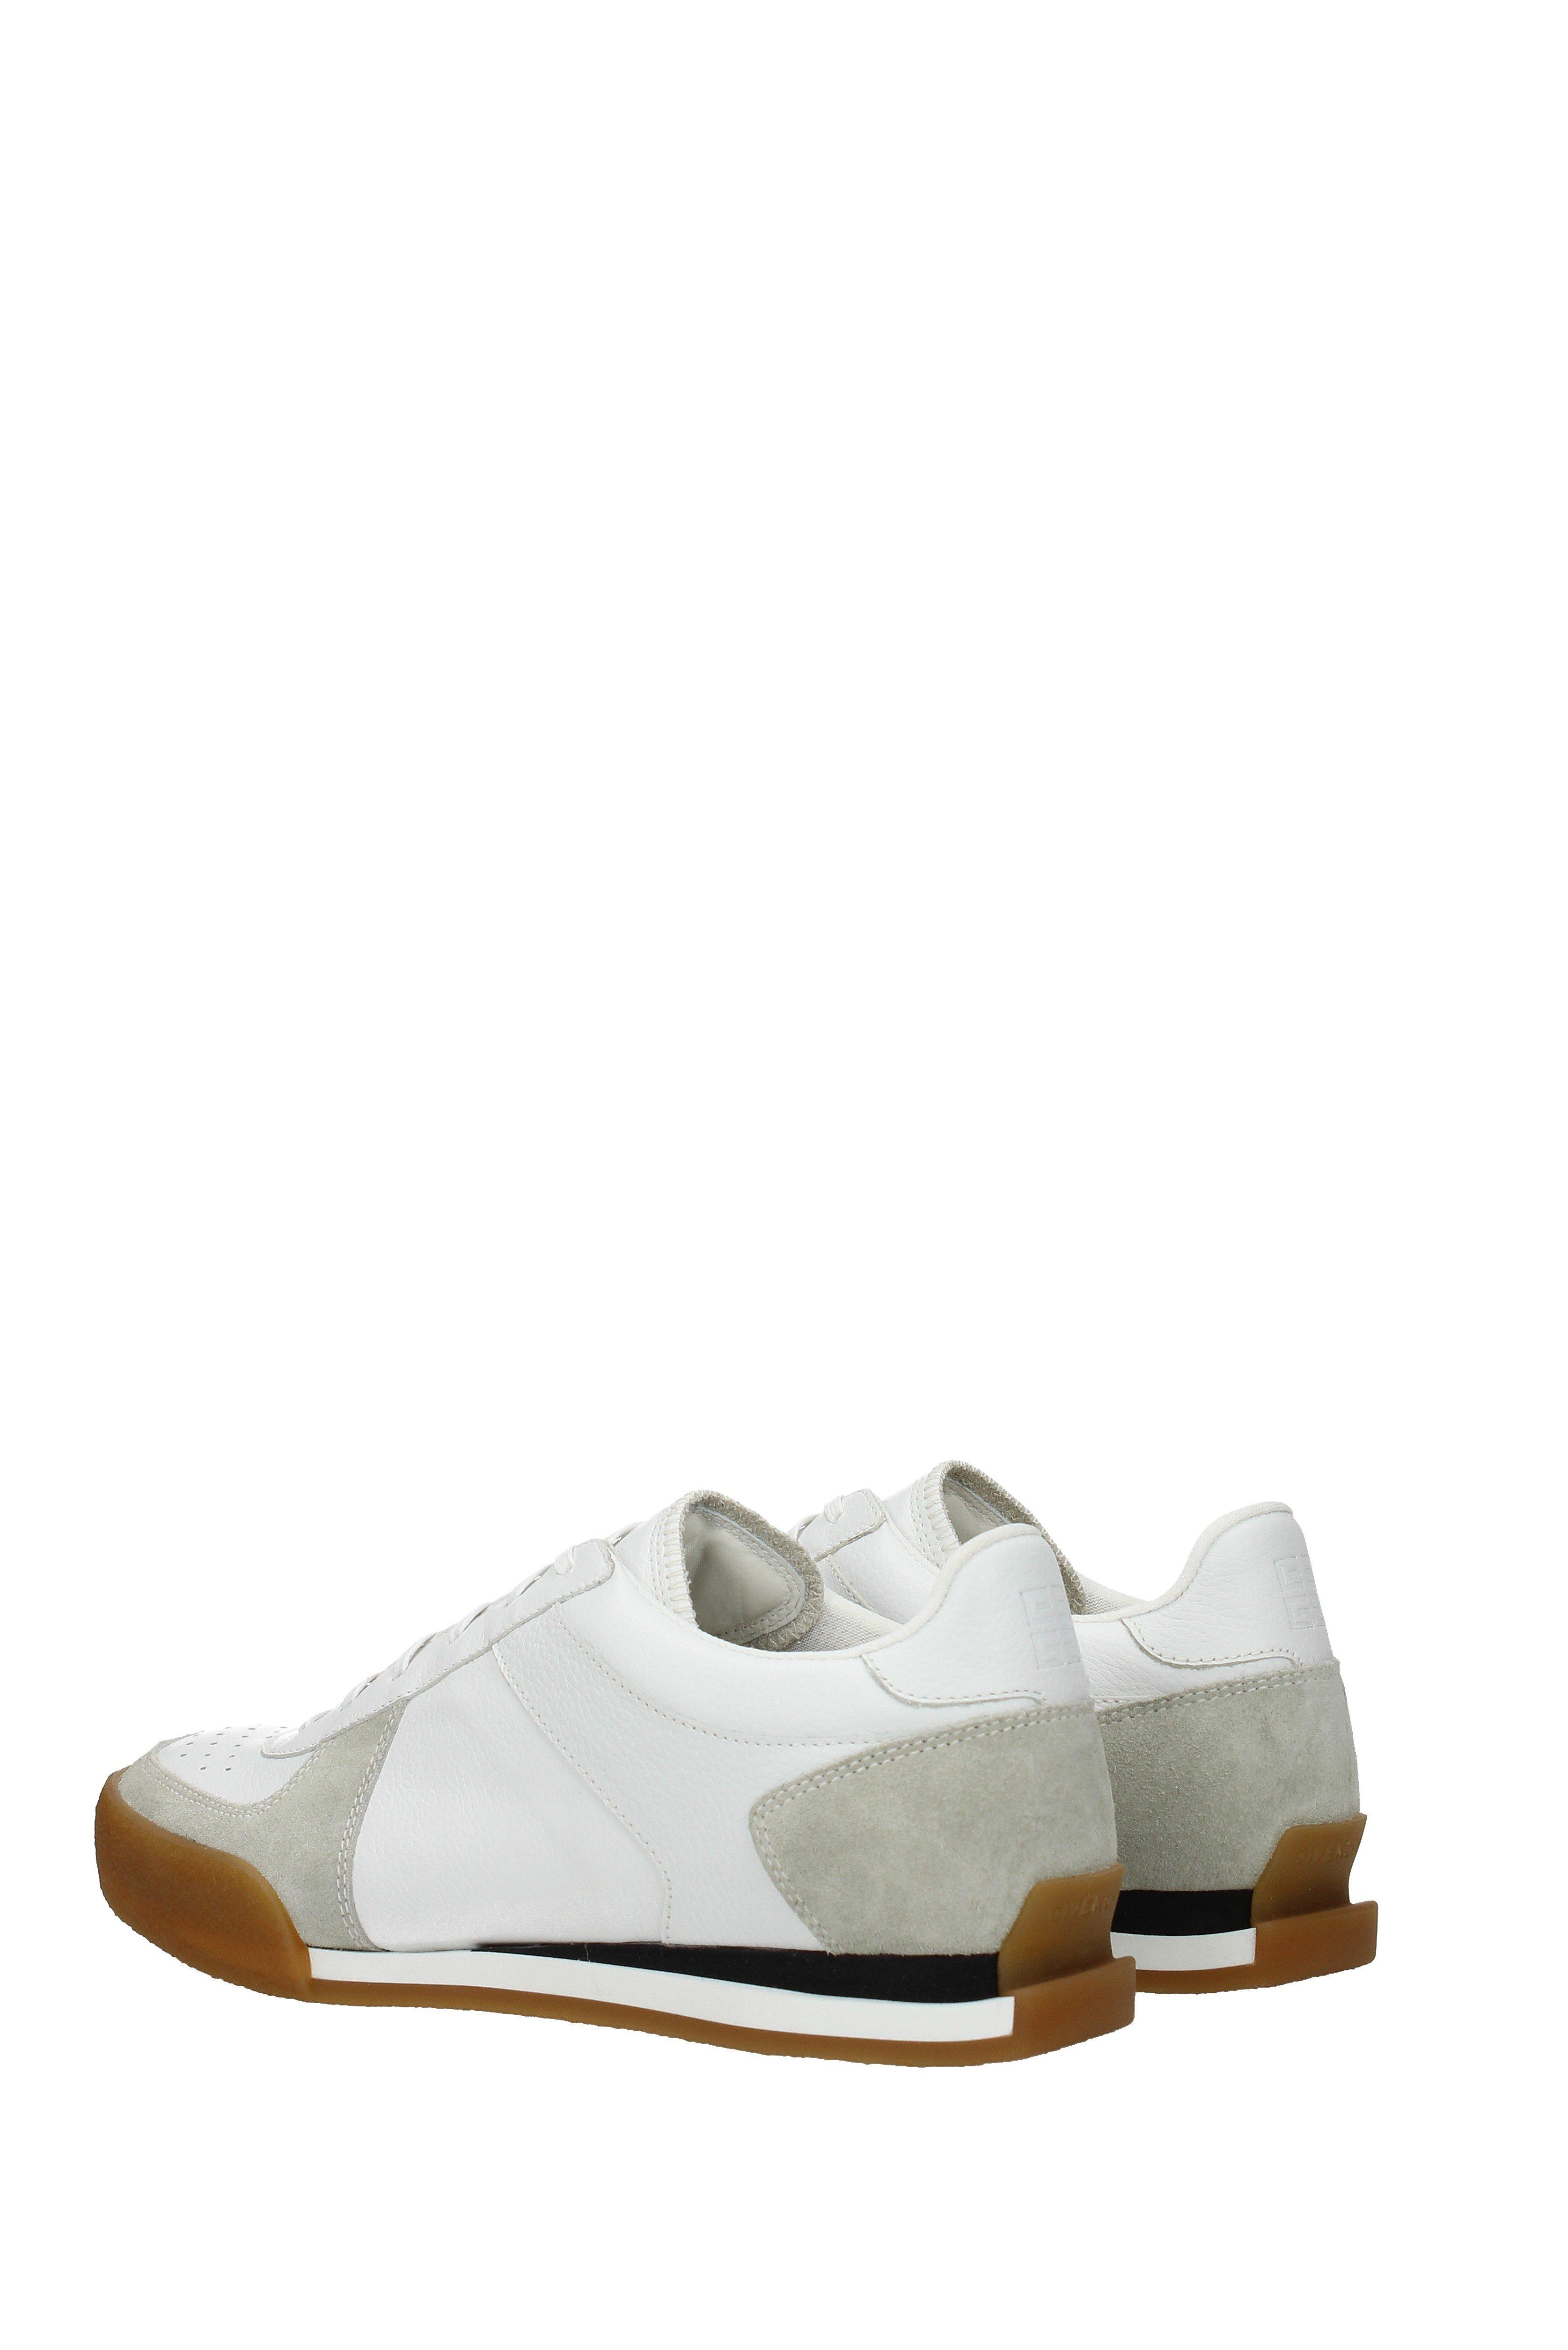 Givenchy Sneakers Men White in White for Men - Lyst